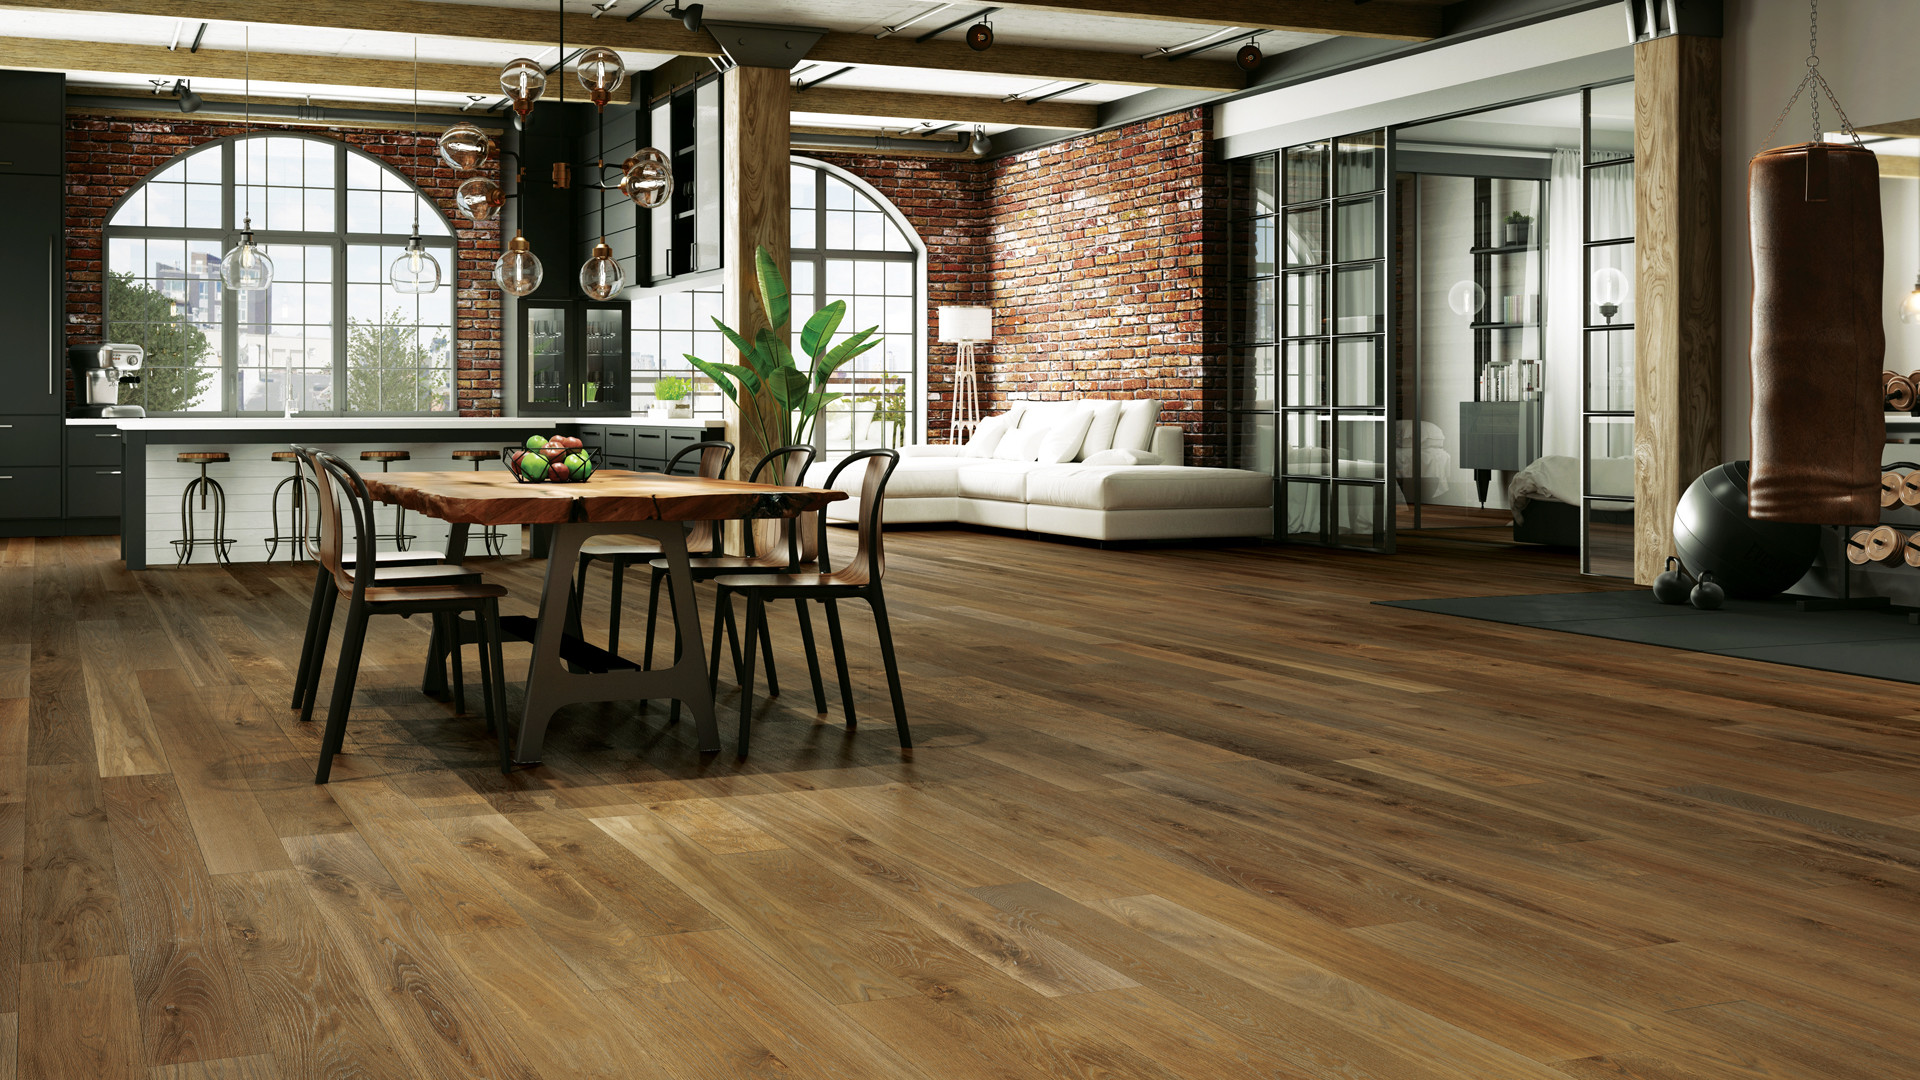 best type of engineered hardwood flooring of 4 latest hardwood flooring trends of 2018 lauzon flooring intended for combined with a wire brushed texture and an ultra matte sheen these new 7a½ wide white oak hardwood floors will definitely add character to your home